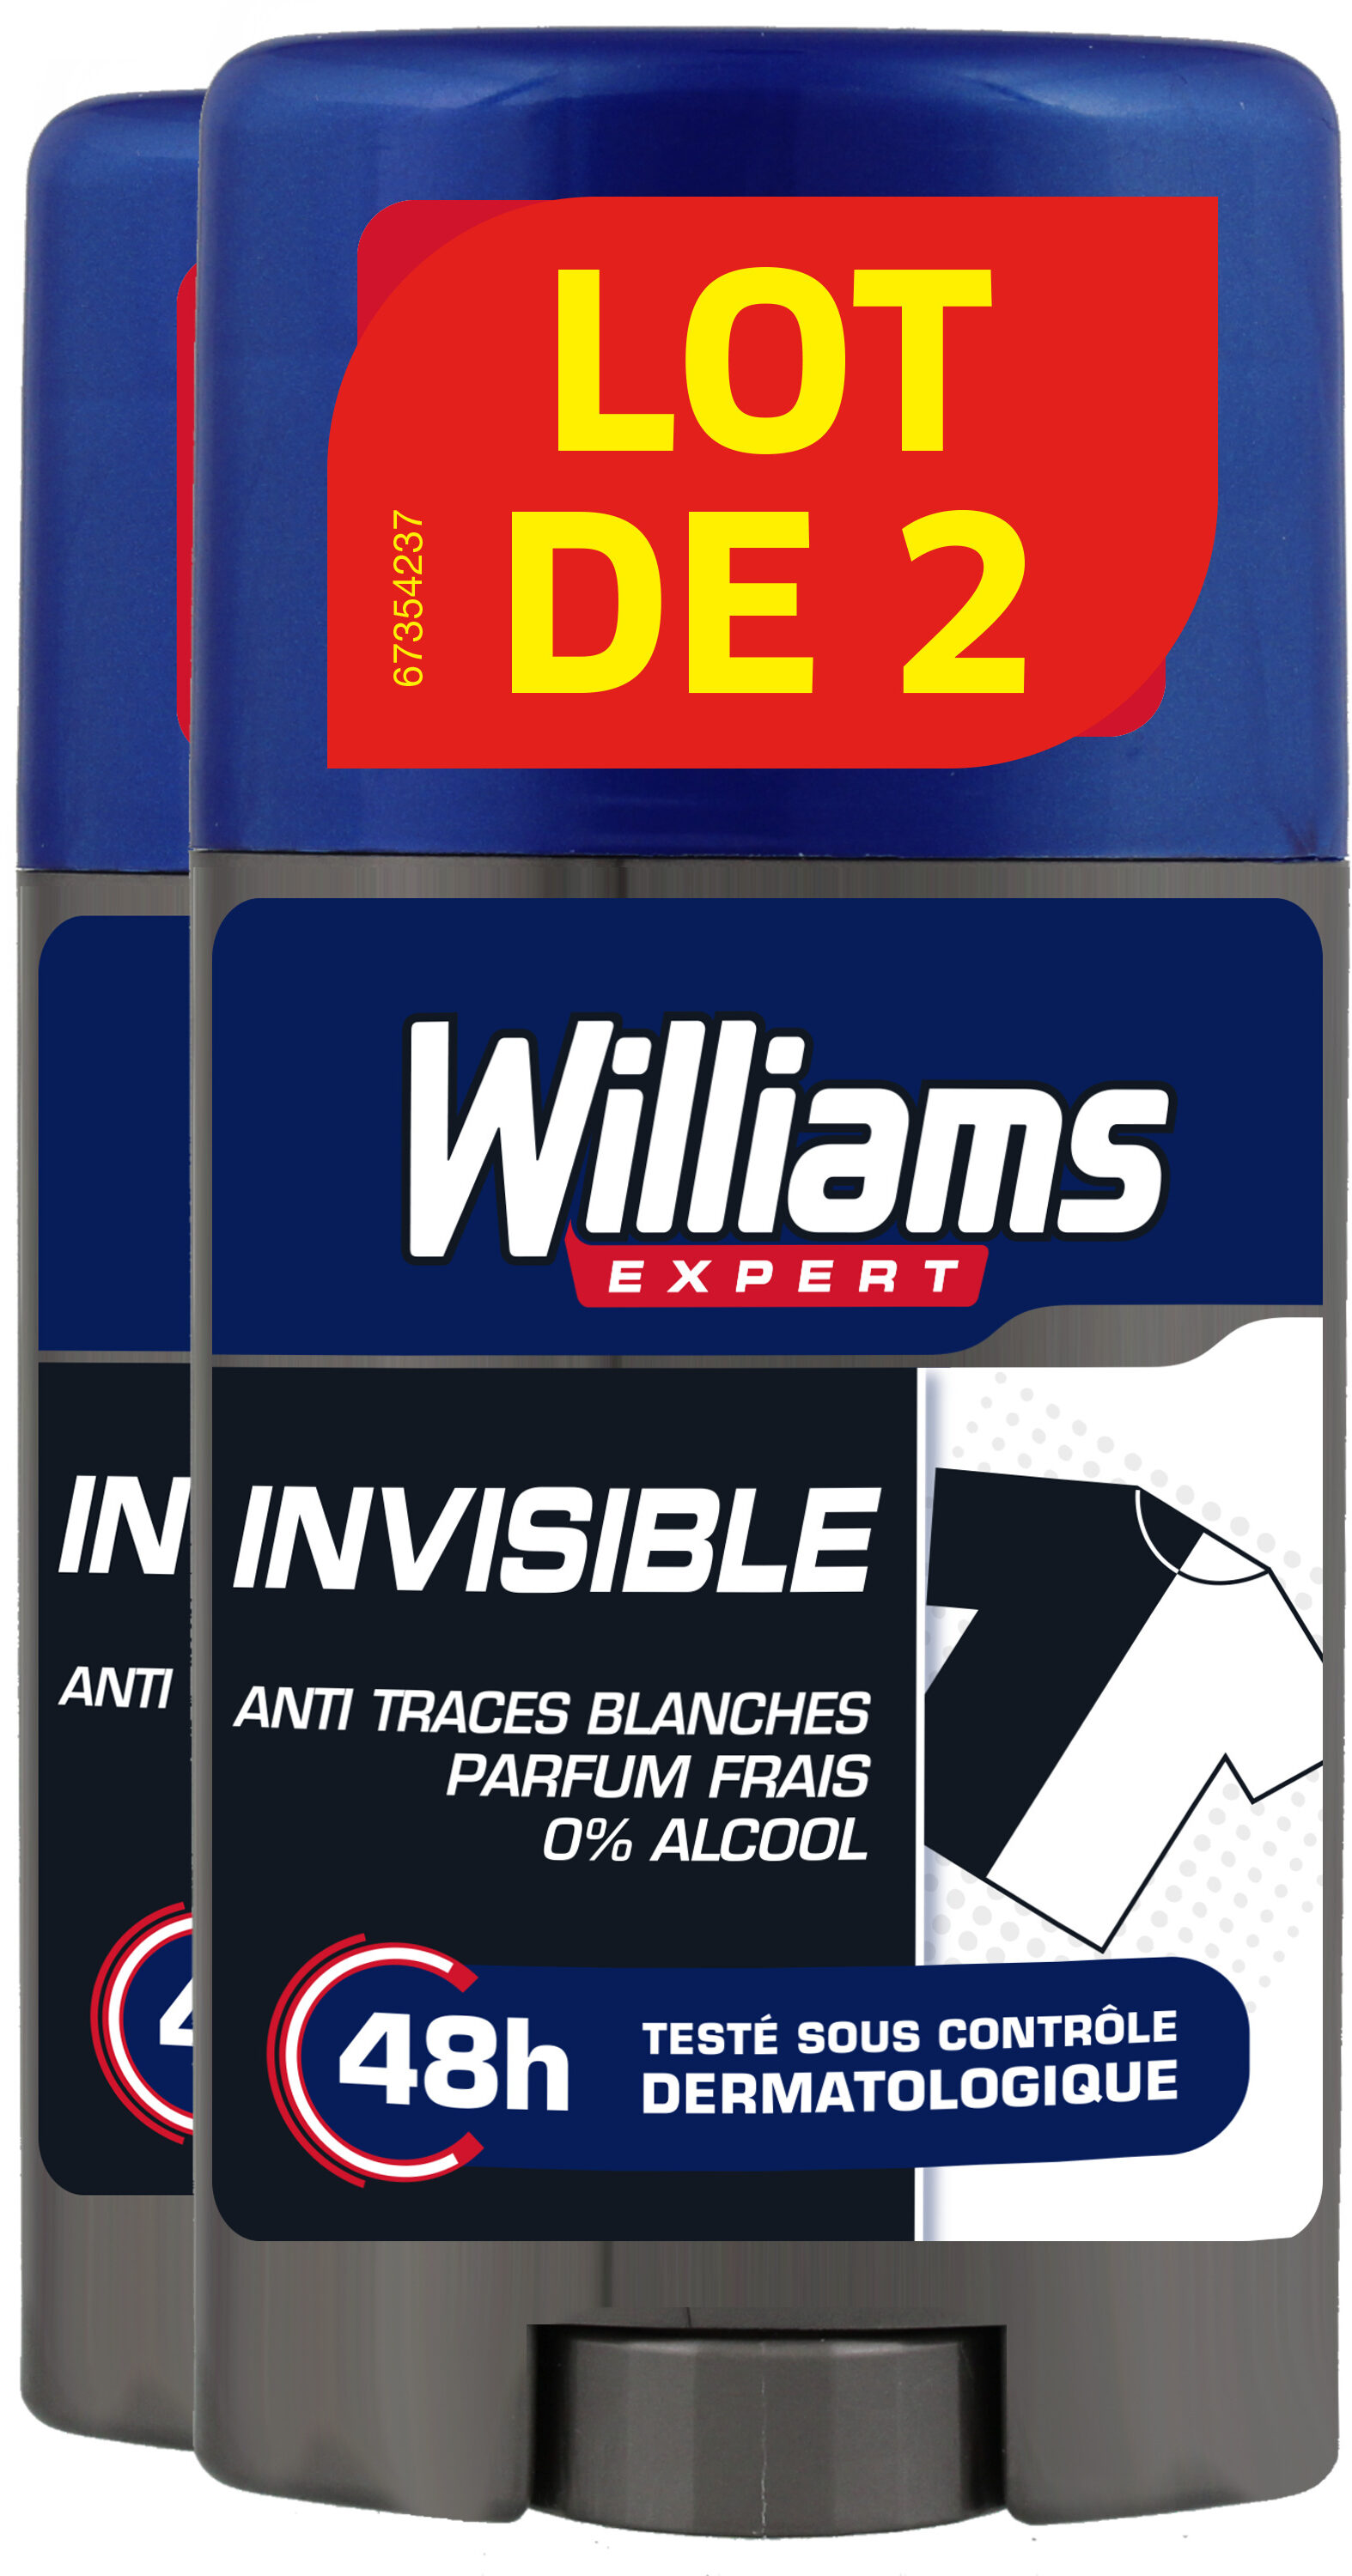 Williams Déodorant Homme Stick Invisible 2x75ml - Tuote - fr